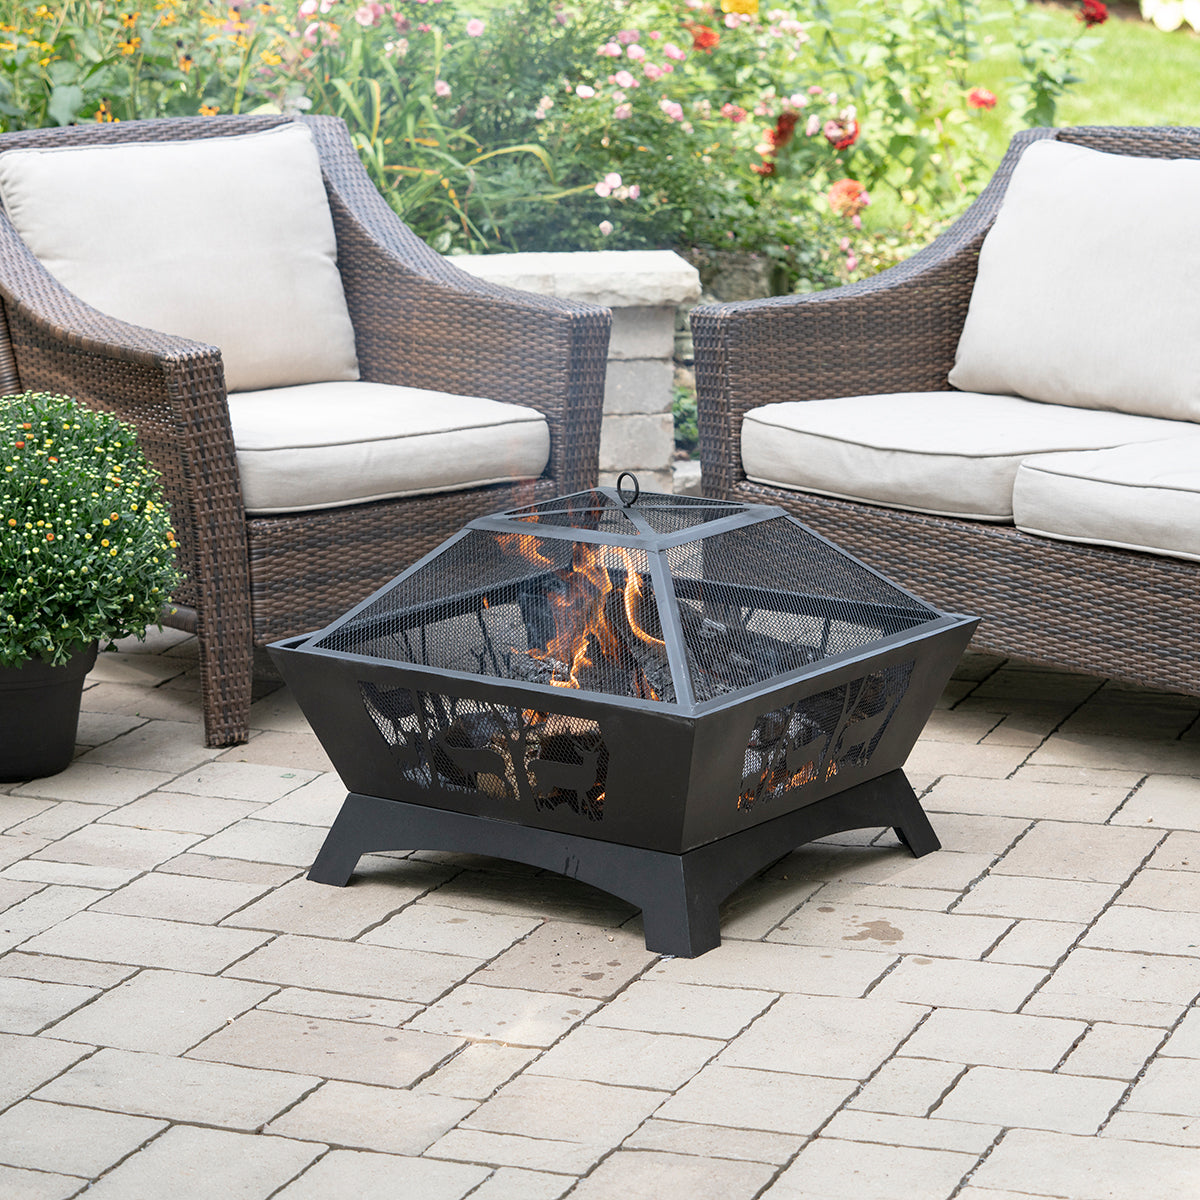 Blue Sky Outdoor Living Wood-Burning Fire Pits